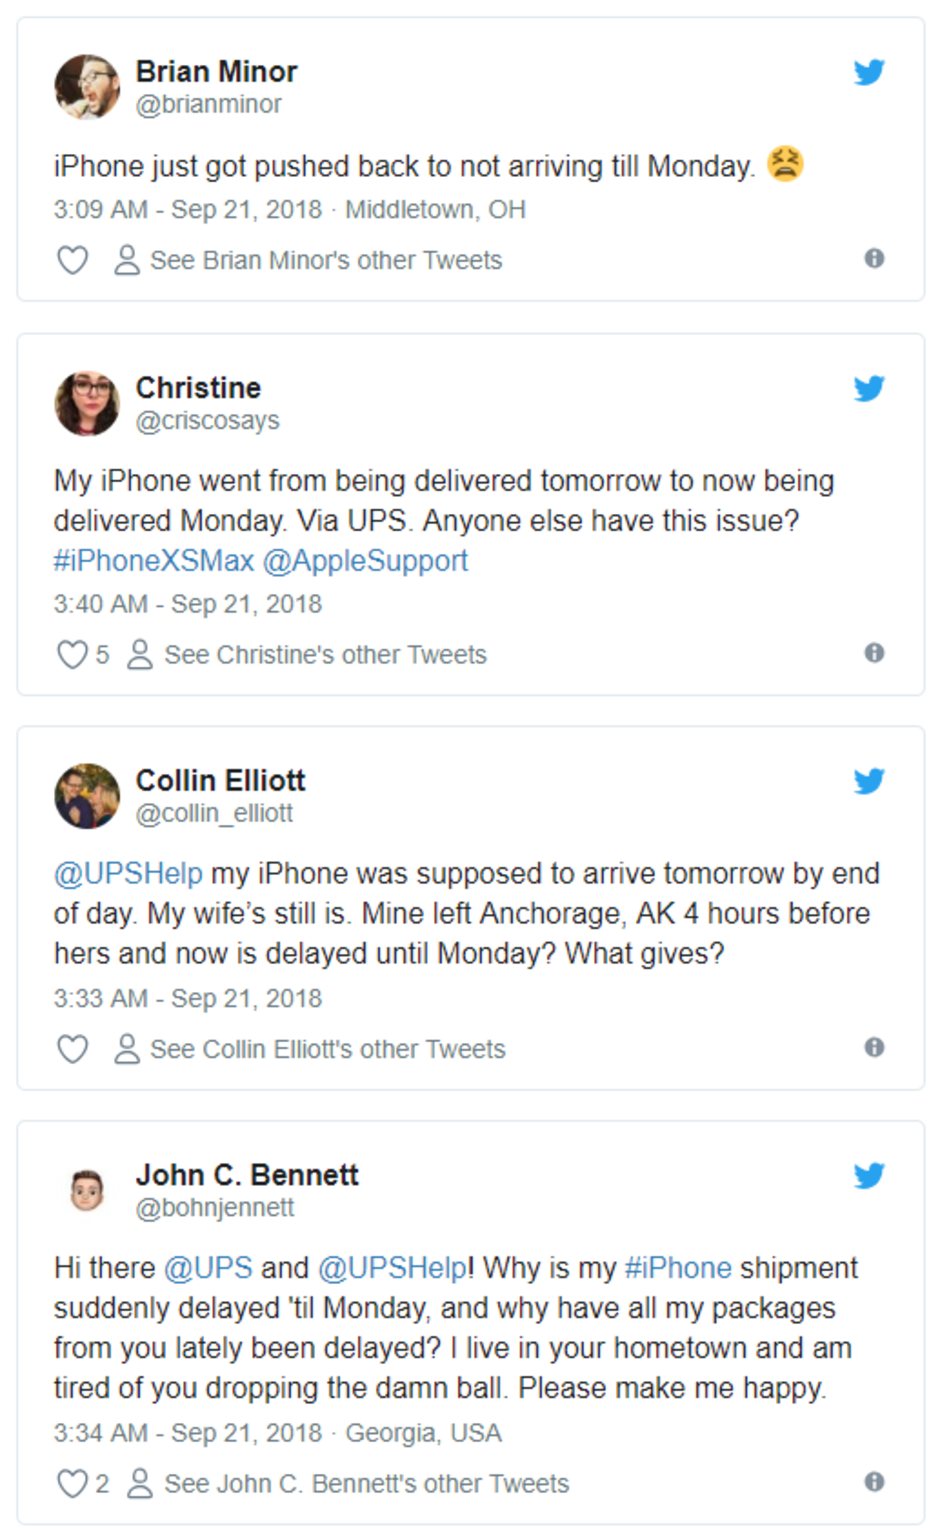 Some iPhone XS shipments have come late to the impatient (results)